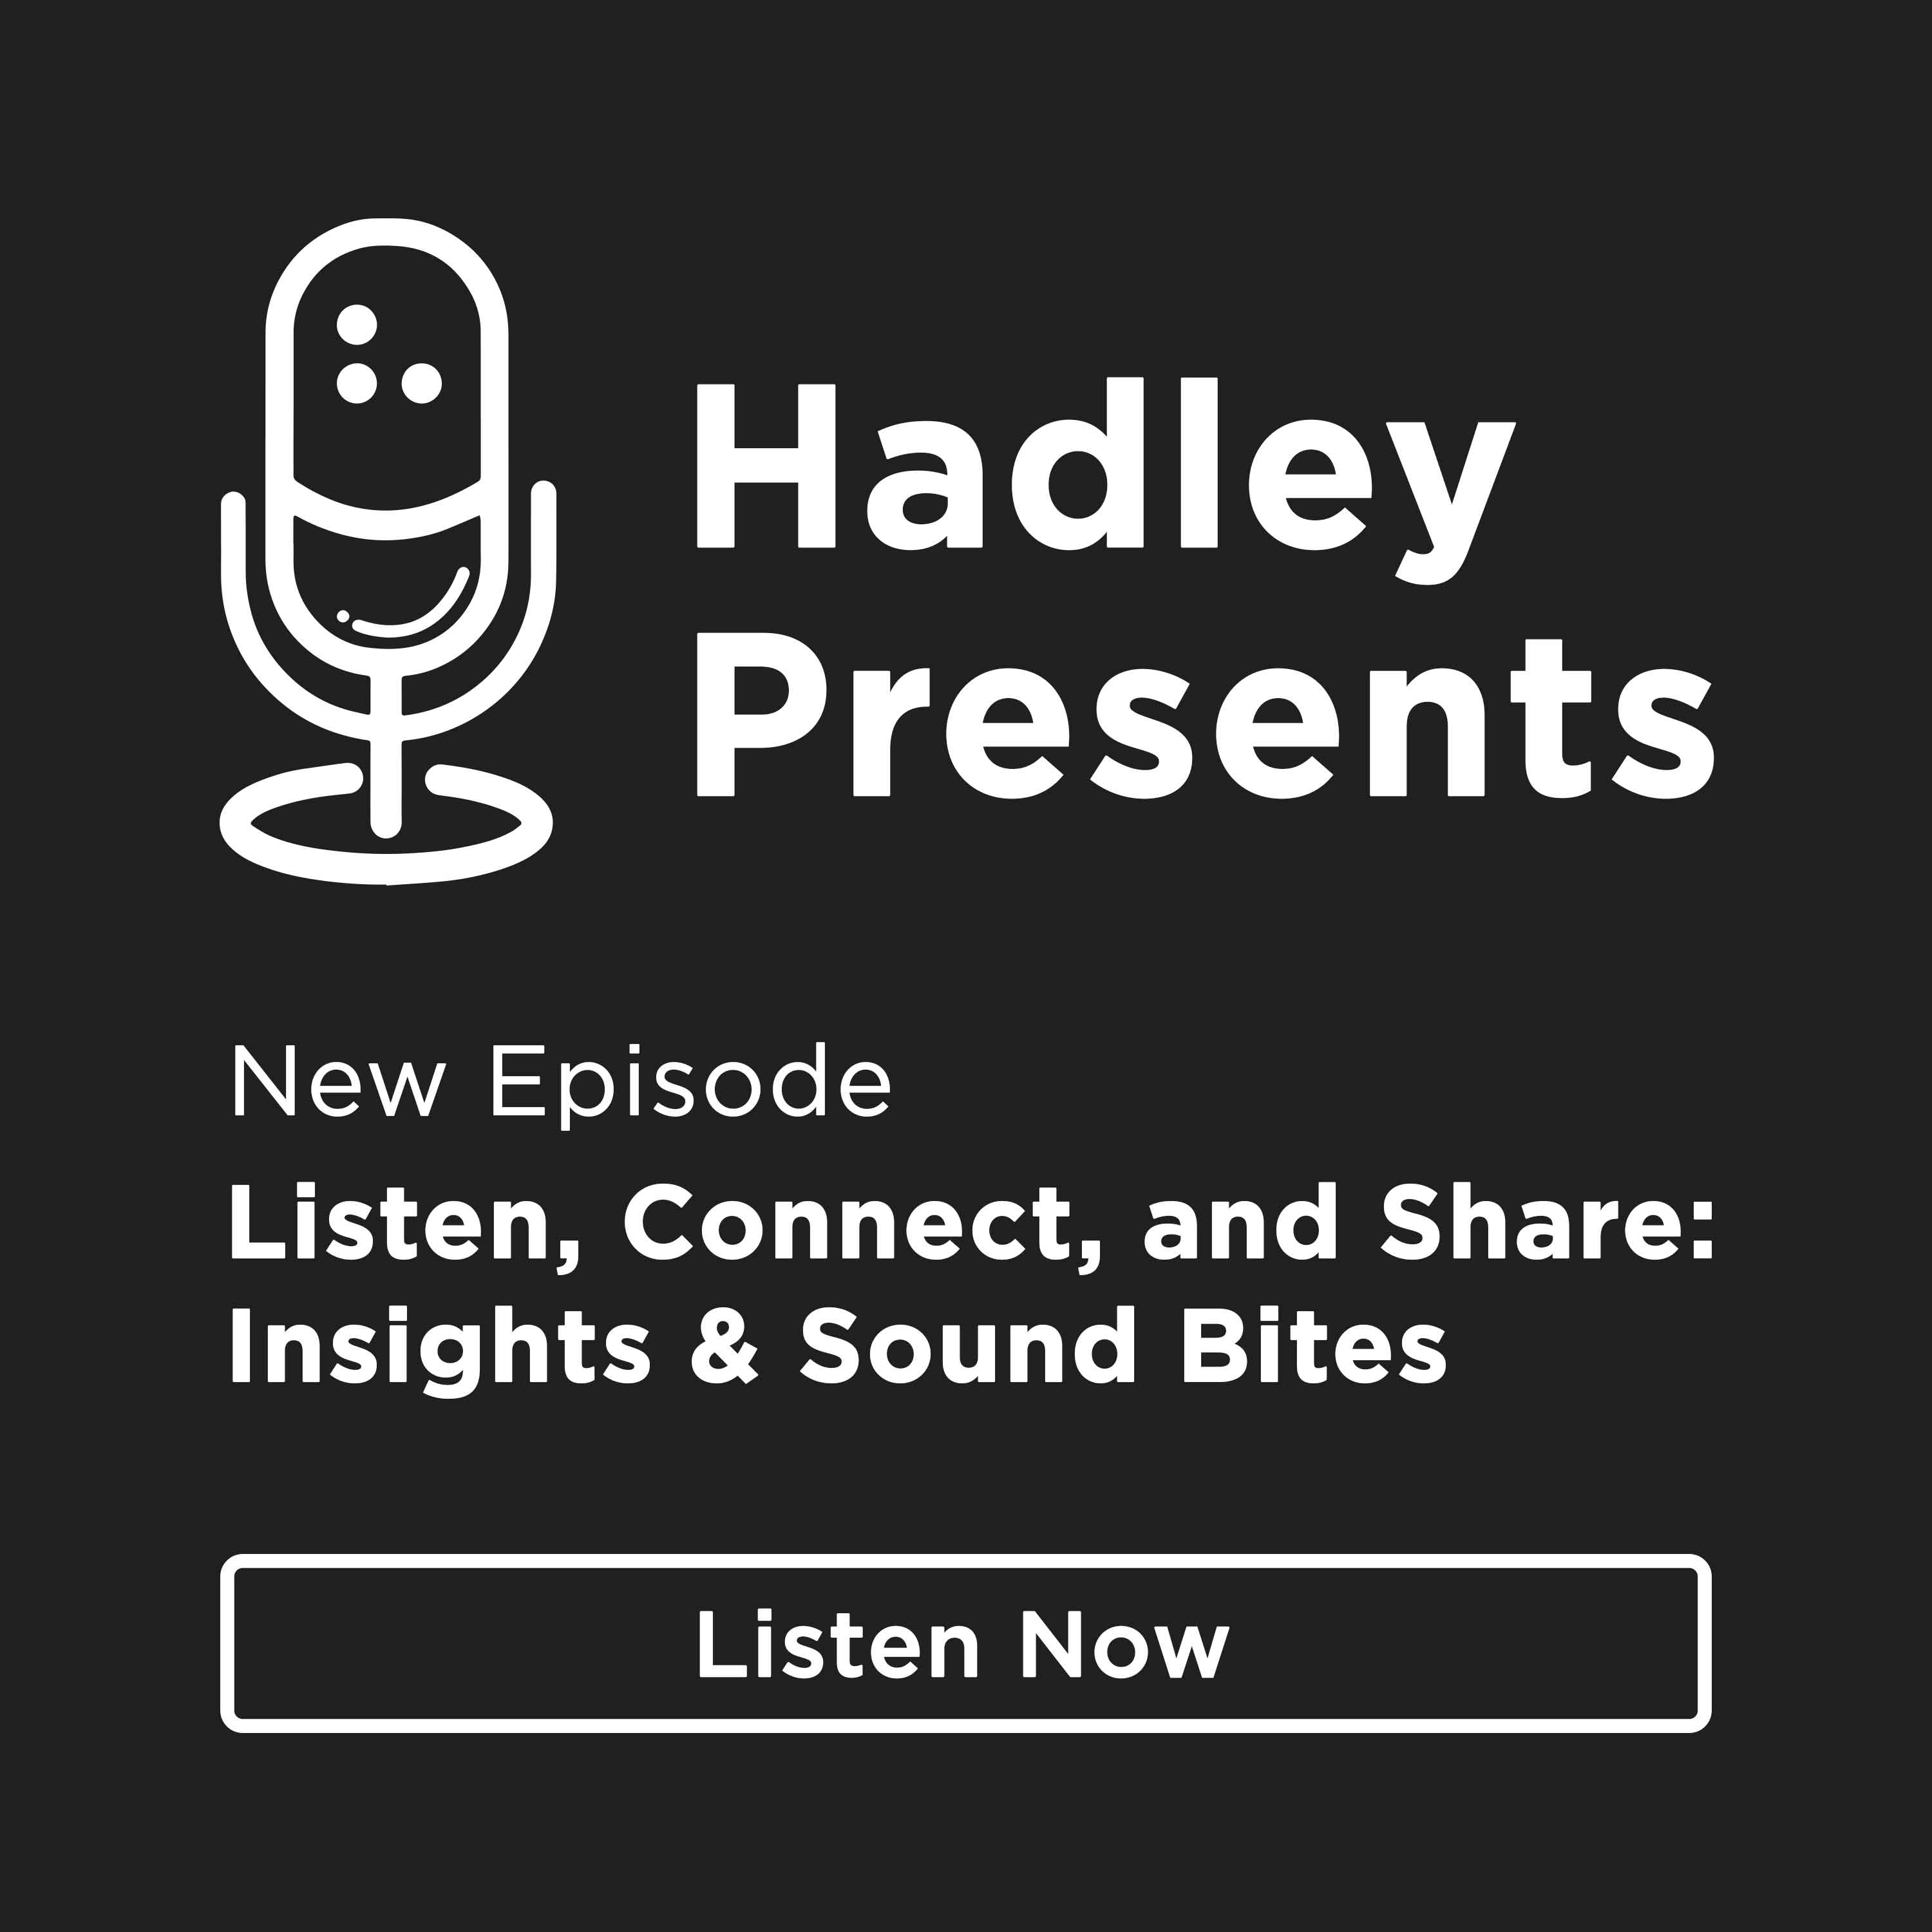 Listen, Connect, and Share: Insights & Sound Bites